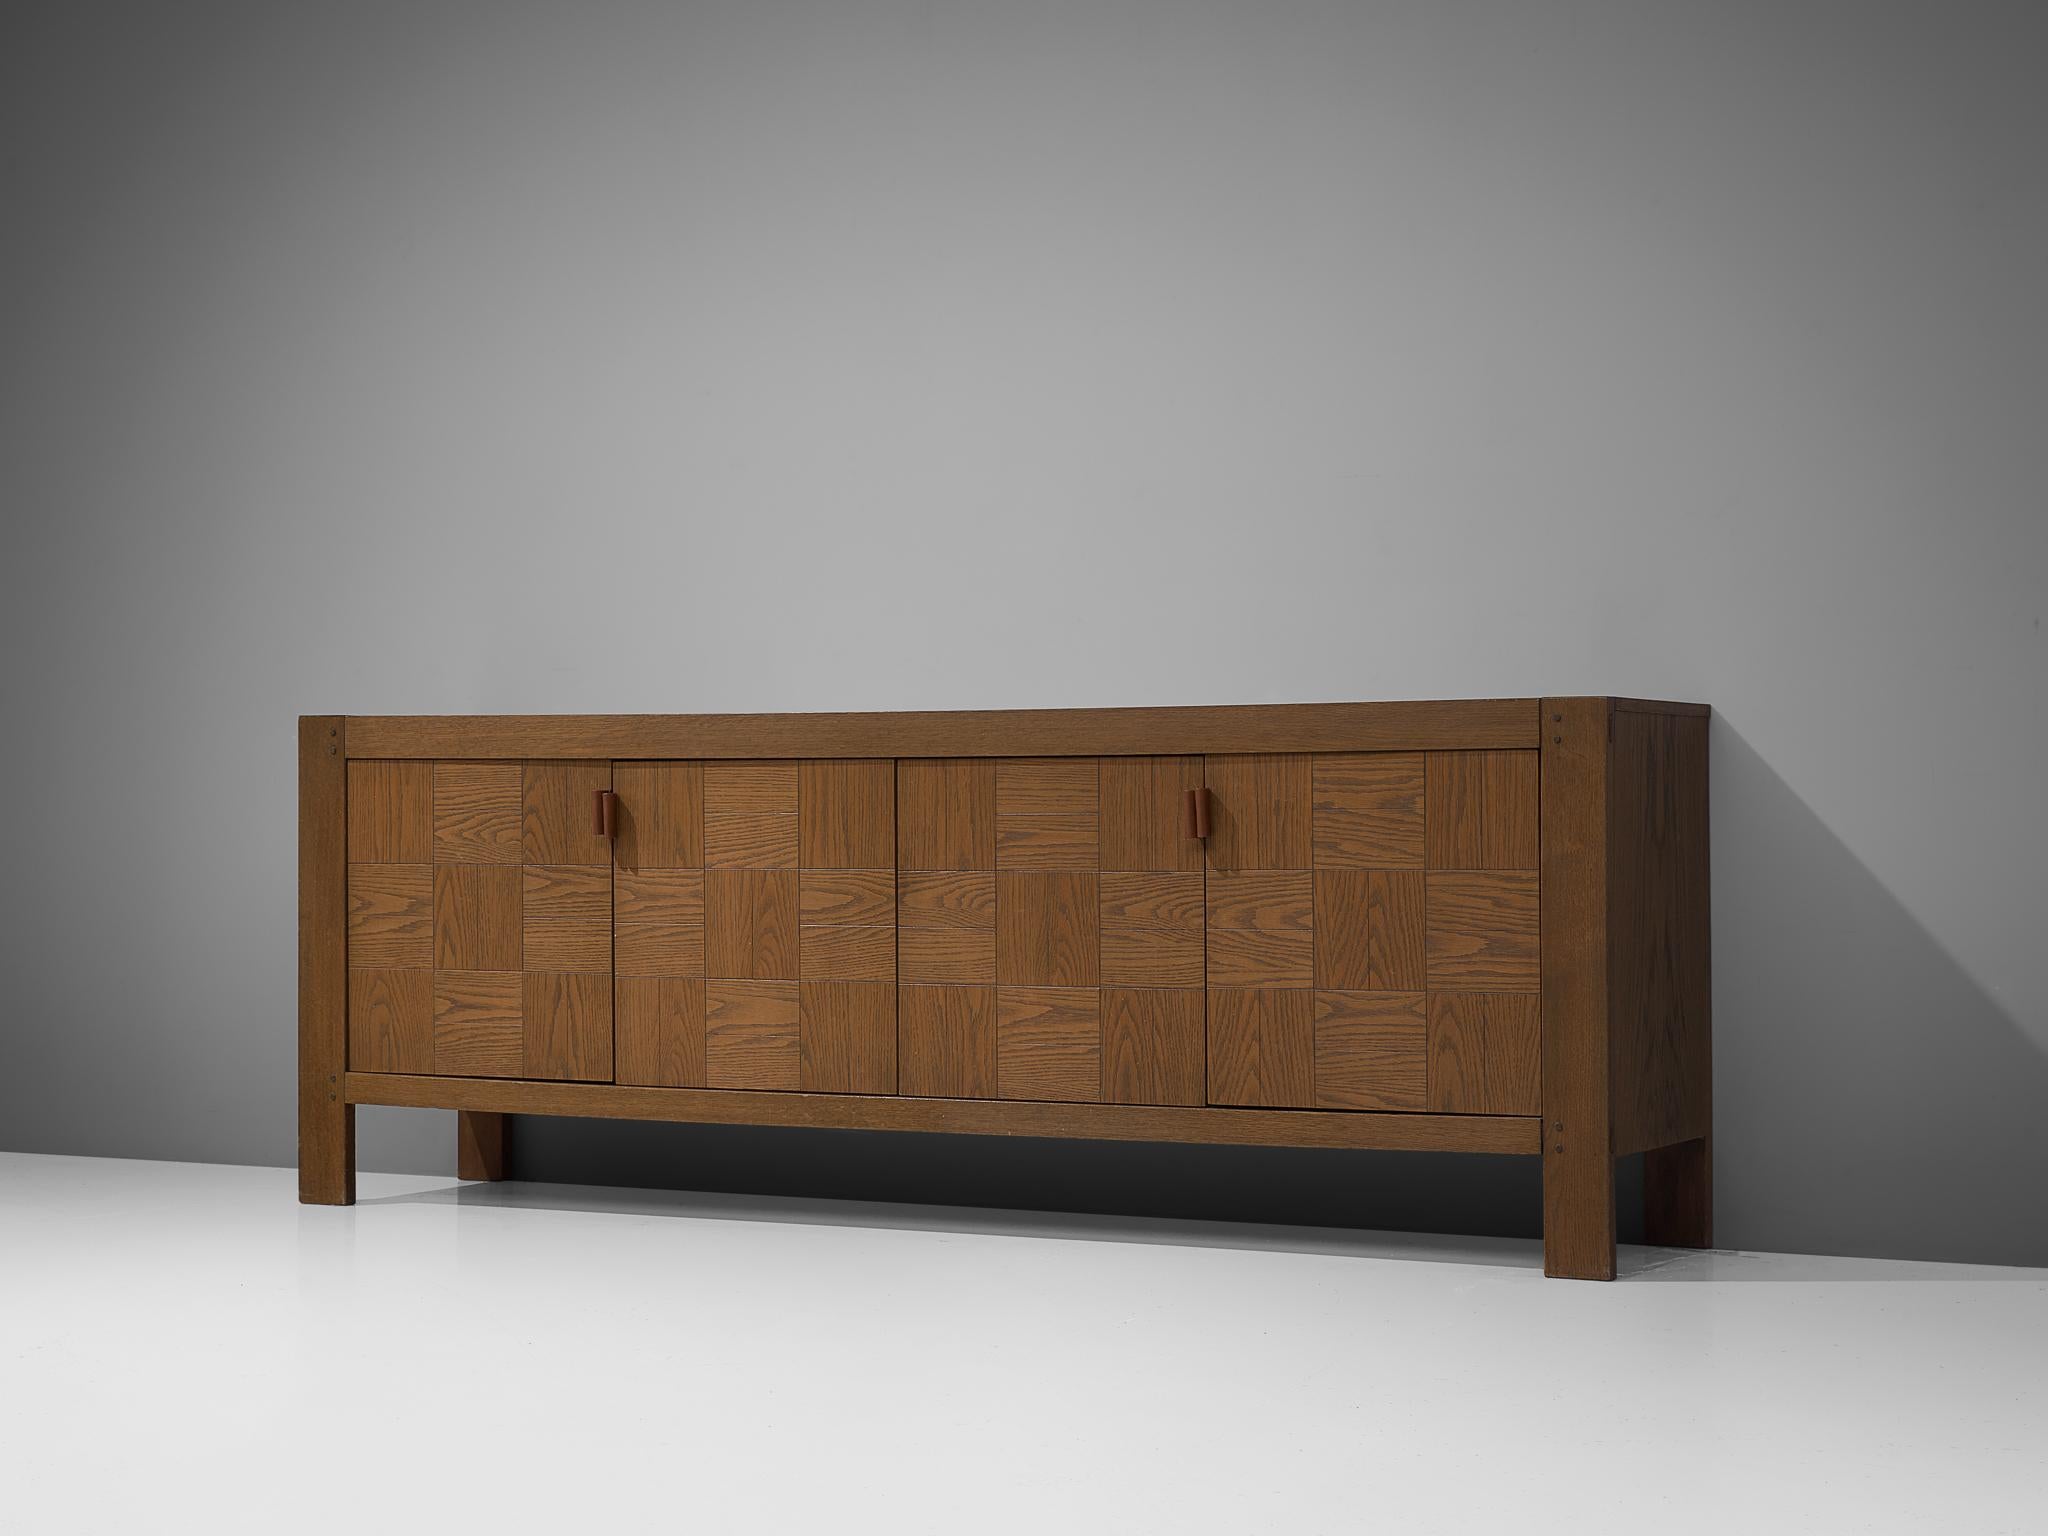 Sideboard, oak, Belgium, 1970s

Brutalist sideboard executed in oak. The decorative doors are finished in way that a patchwork is created with a combination of horizontal and vertical inlayed grained oak tiles. The handles are made of cognac leather